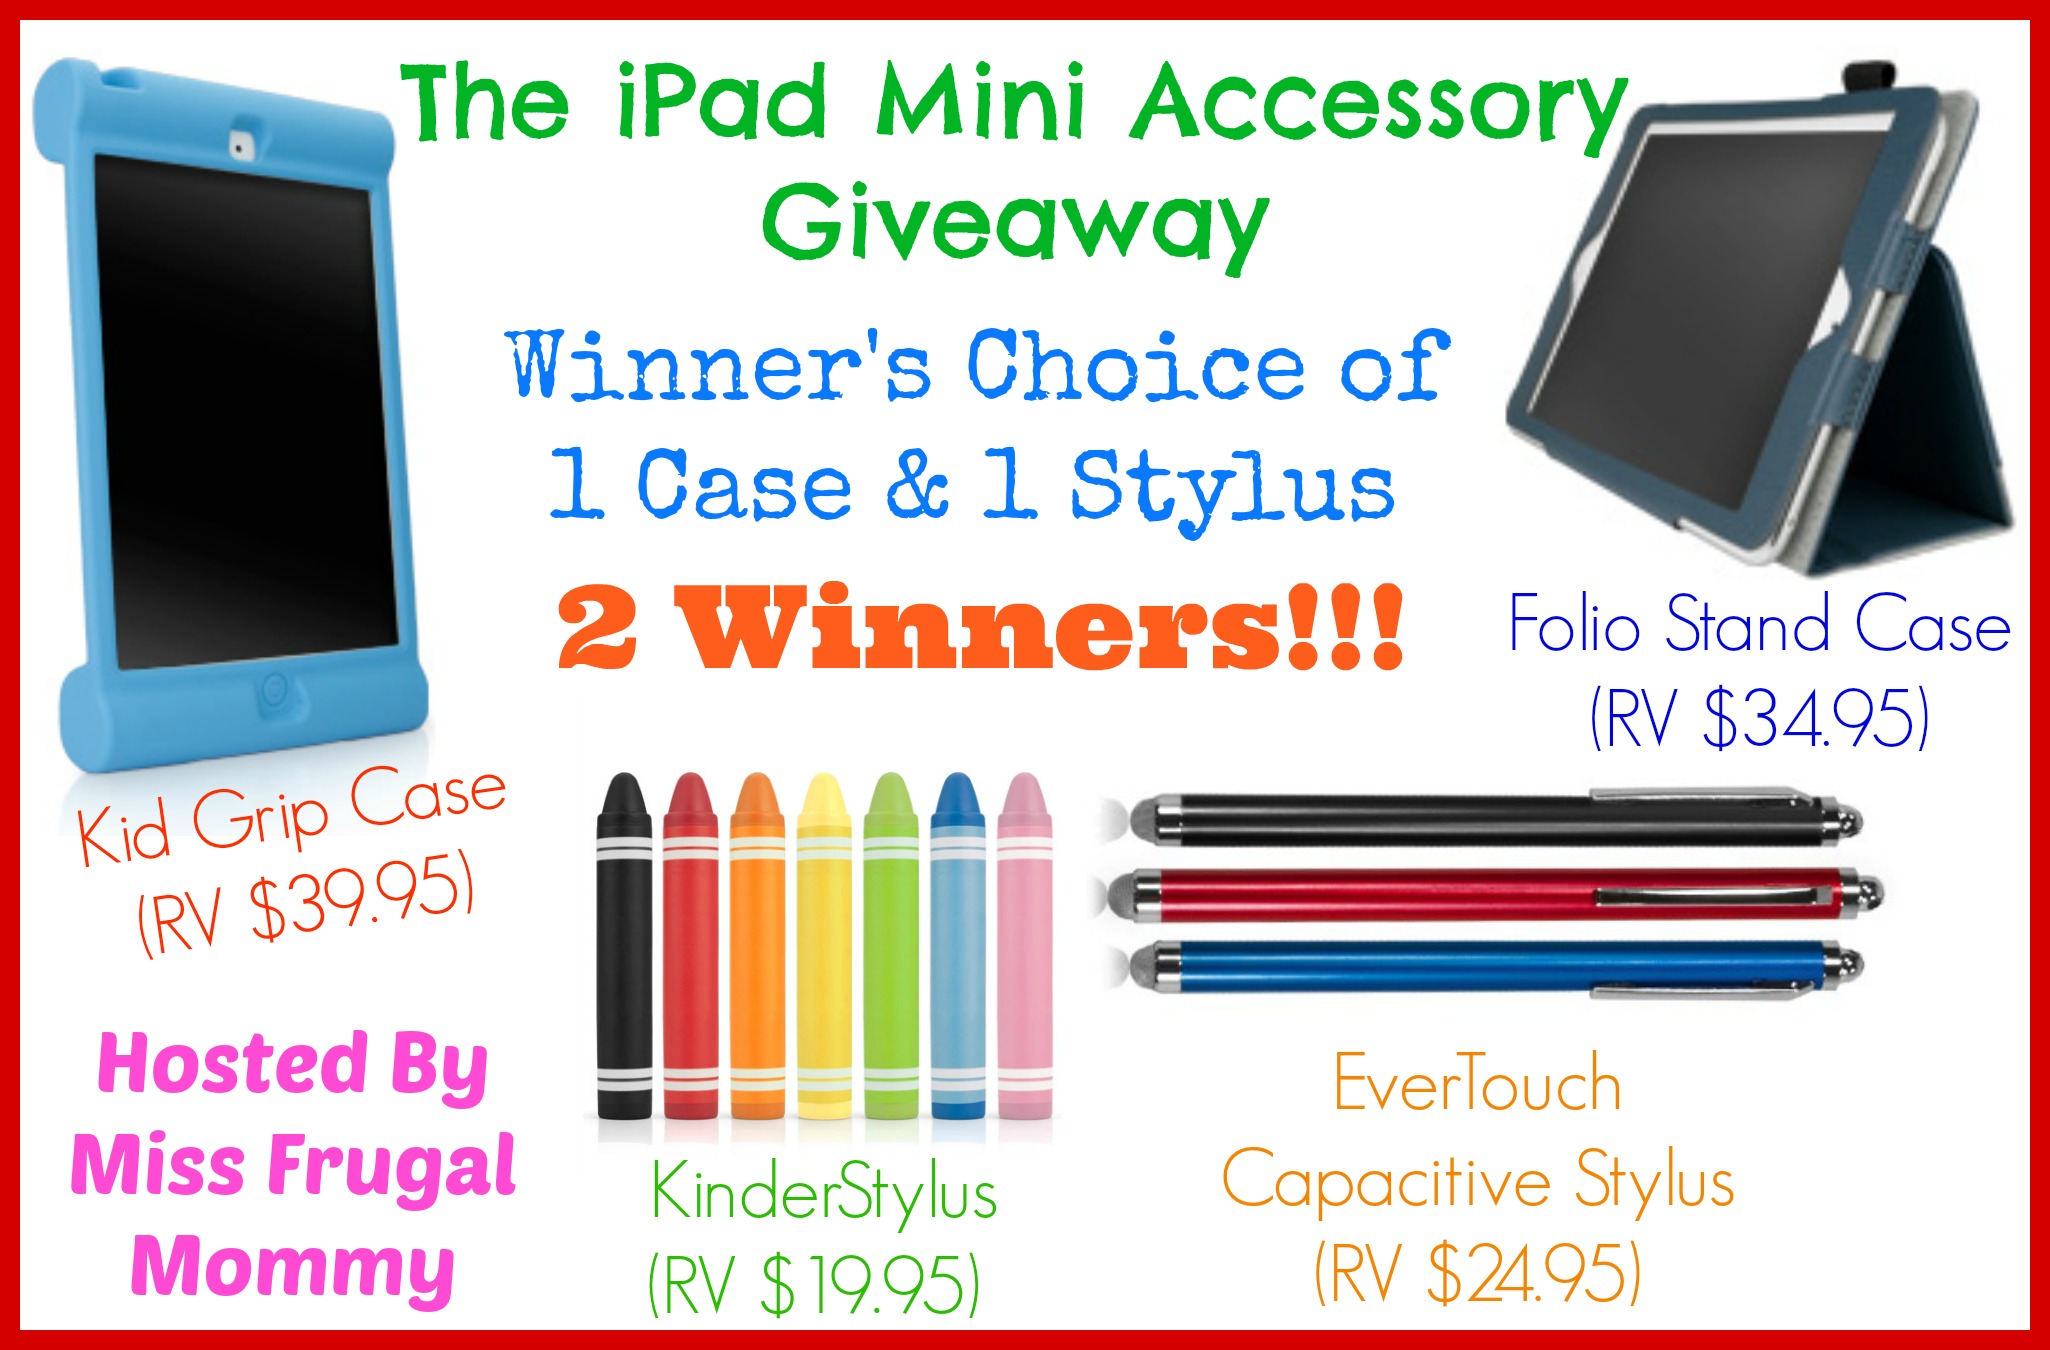 http://missfrugalmommy.com/wp-content/uploads/2014/03/ipad-mini-giveaway.jpg